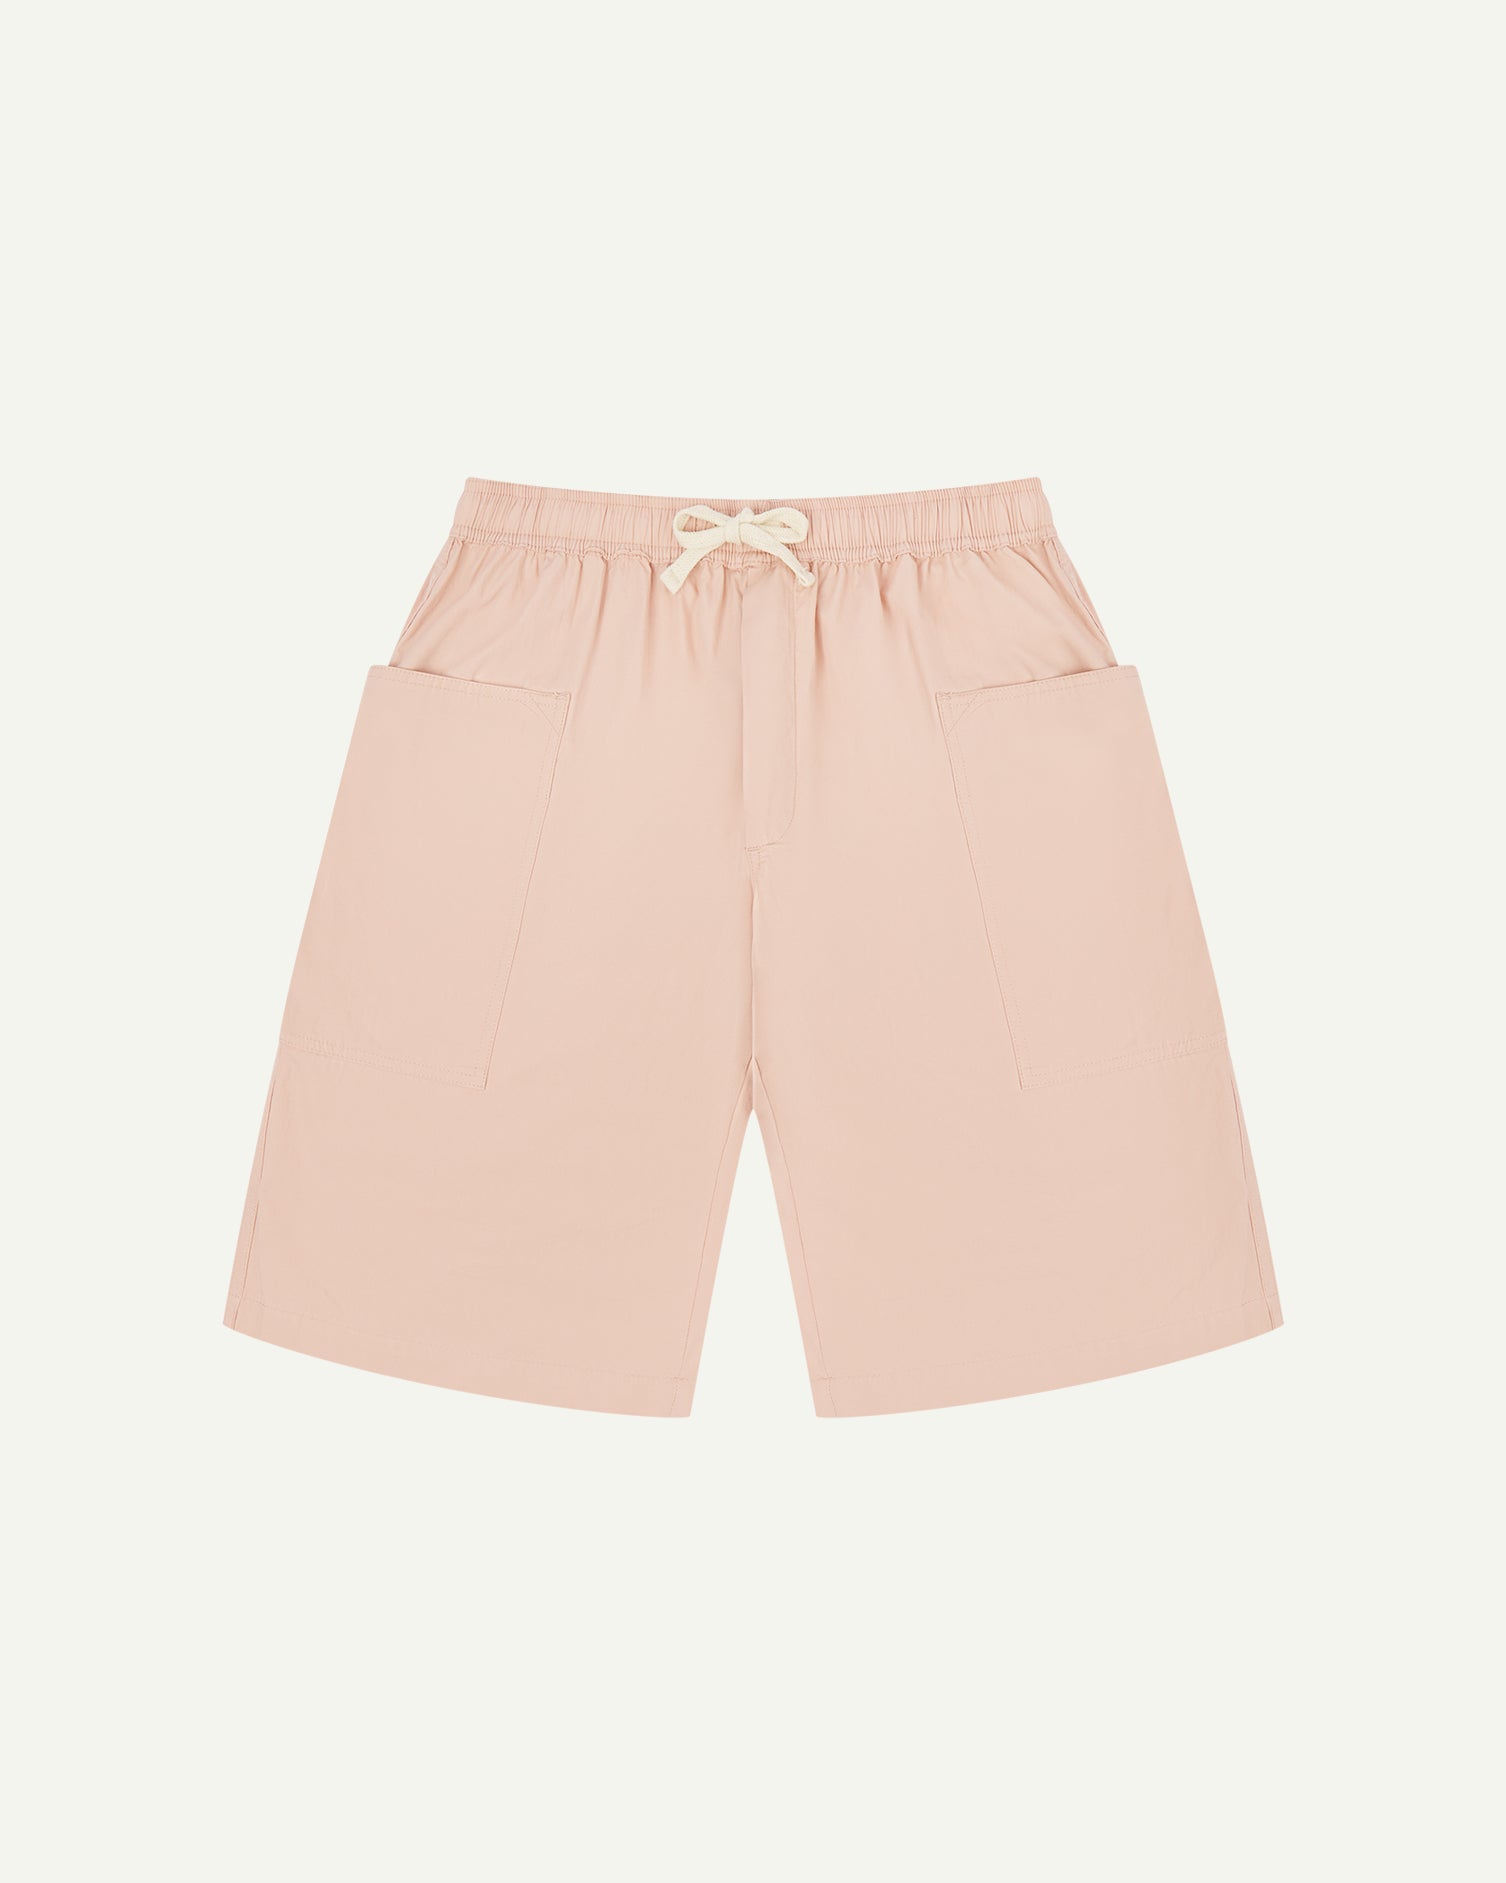 Front view of dusty pink organic cotton #5015 lightweight cotton shorts by Uskees. Clear view of elasticated waist and deep front pockets.